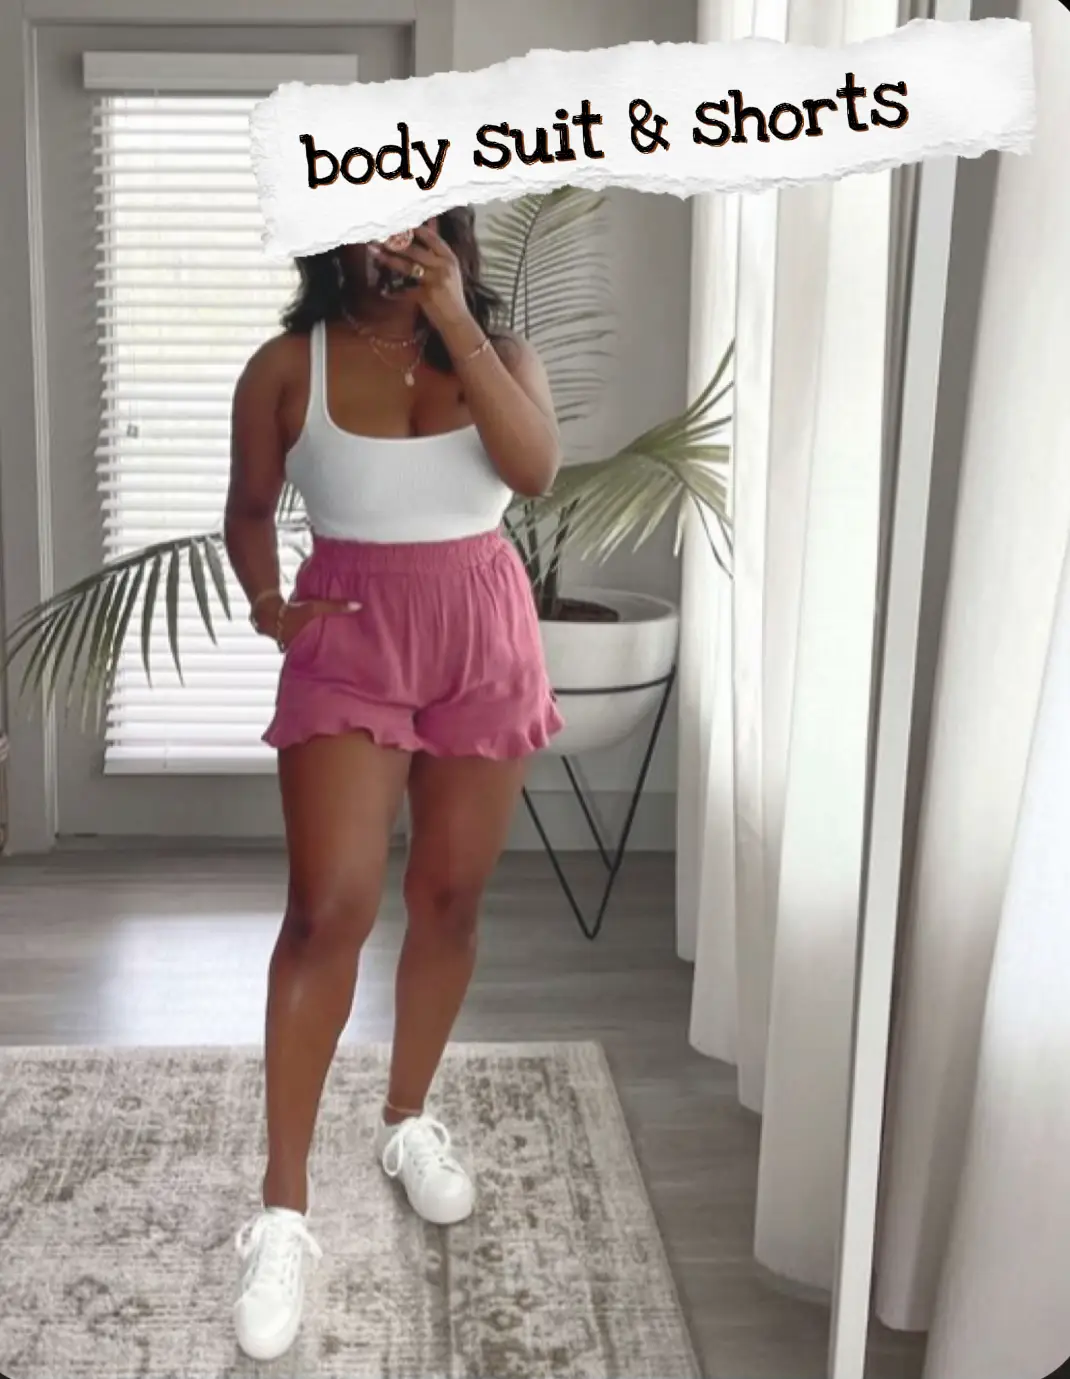 I'm 5'7” and a size 16 with PCOS belly, I did a Shein haul & the